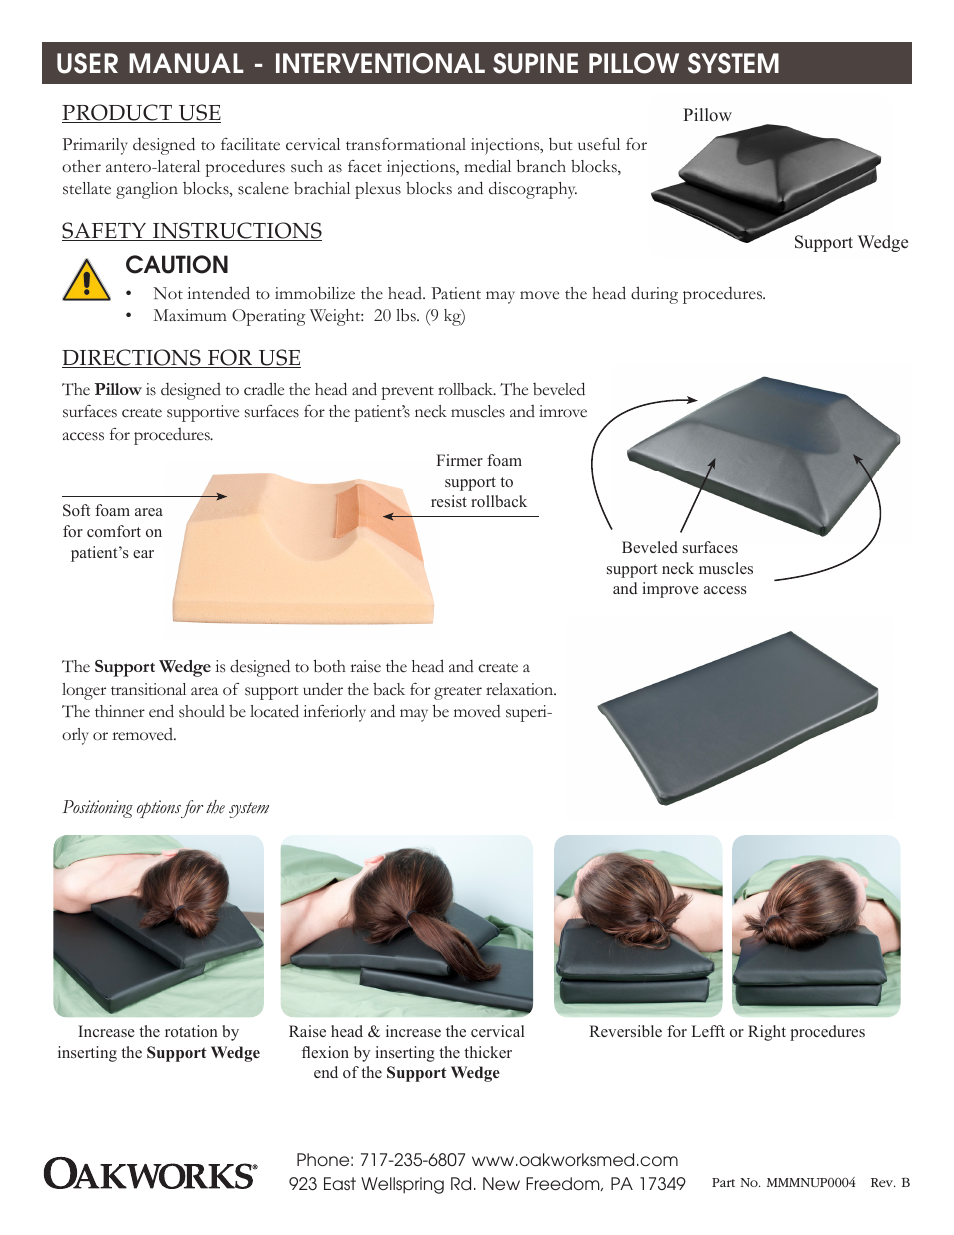 Interventional Supine Pillow System